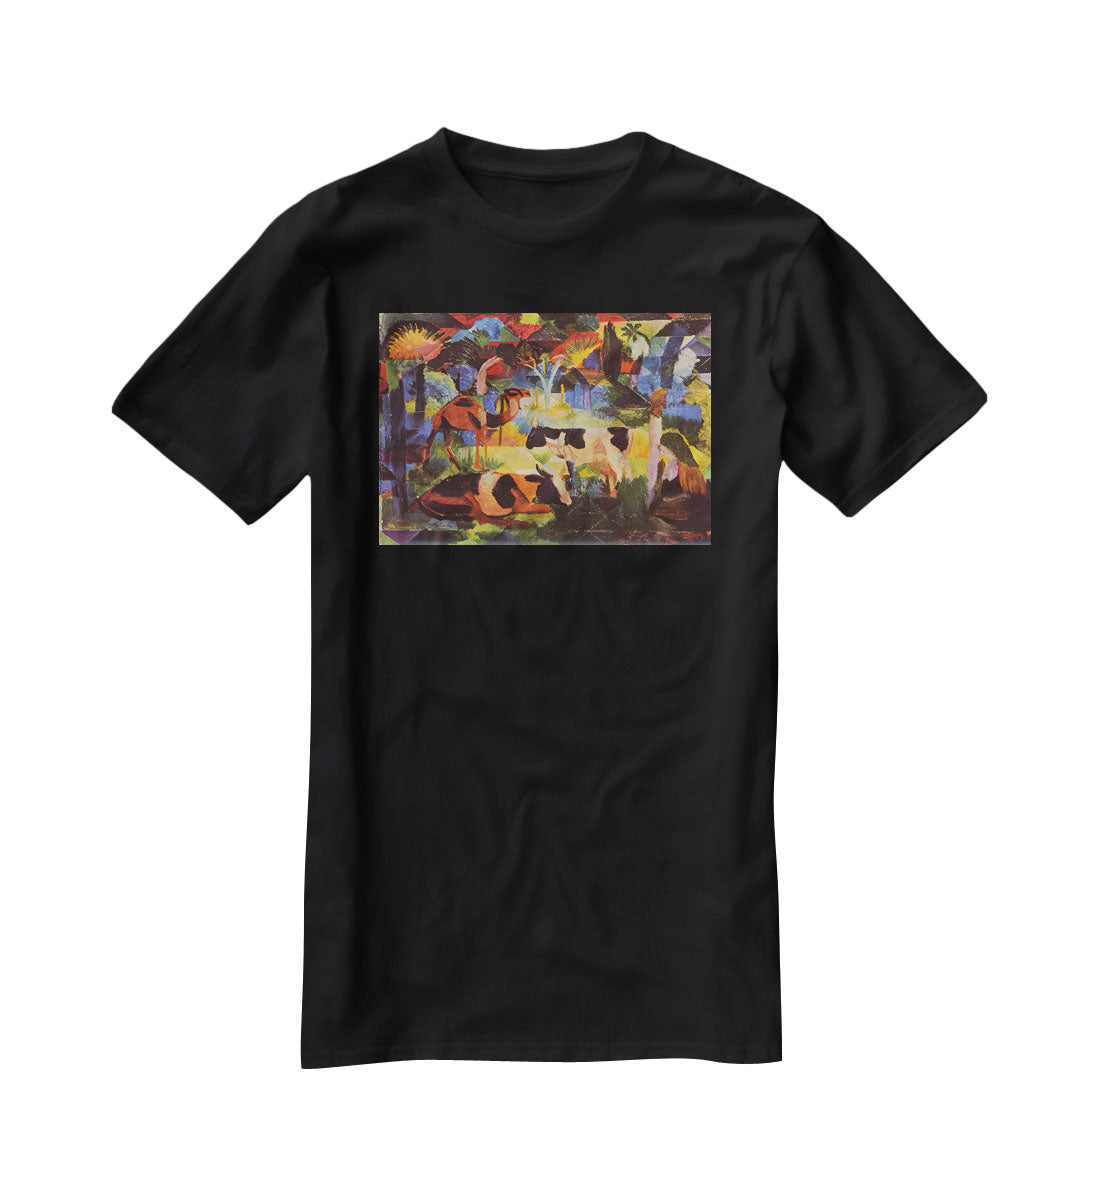 Landscape with cows and camels by Macke T-Shirt - Canvas Art Rocks - 1